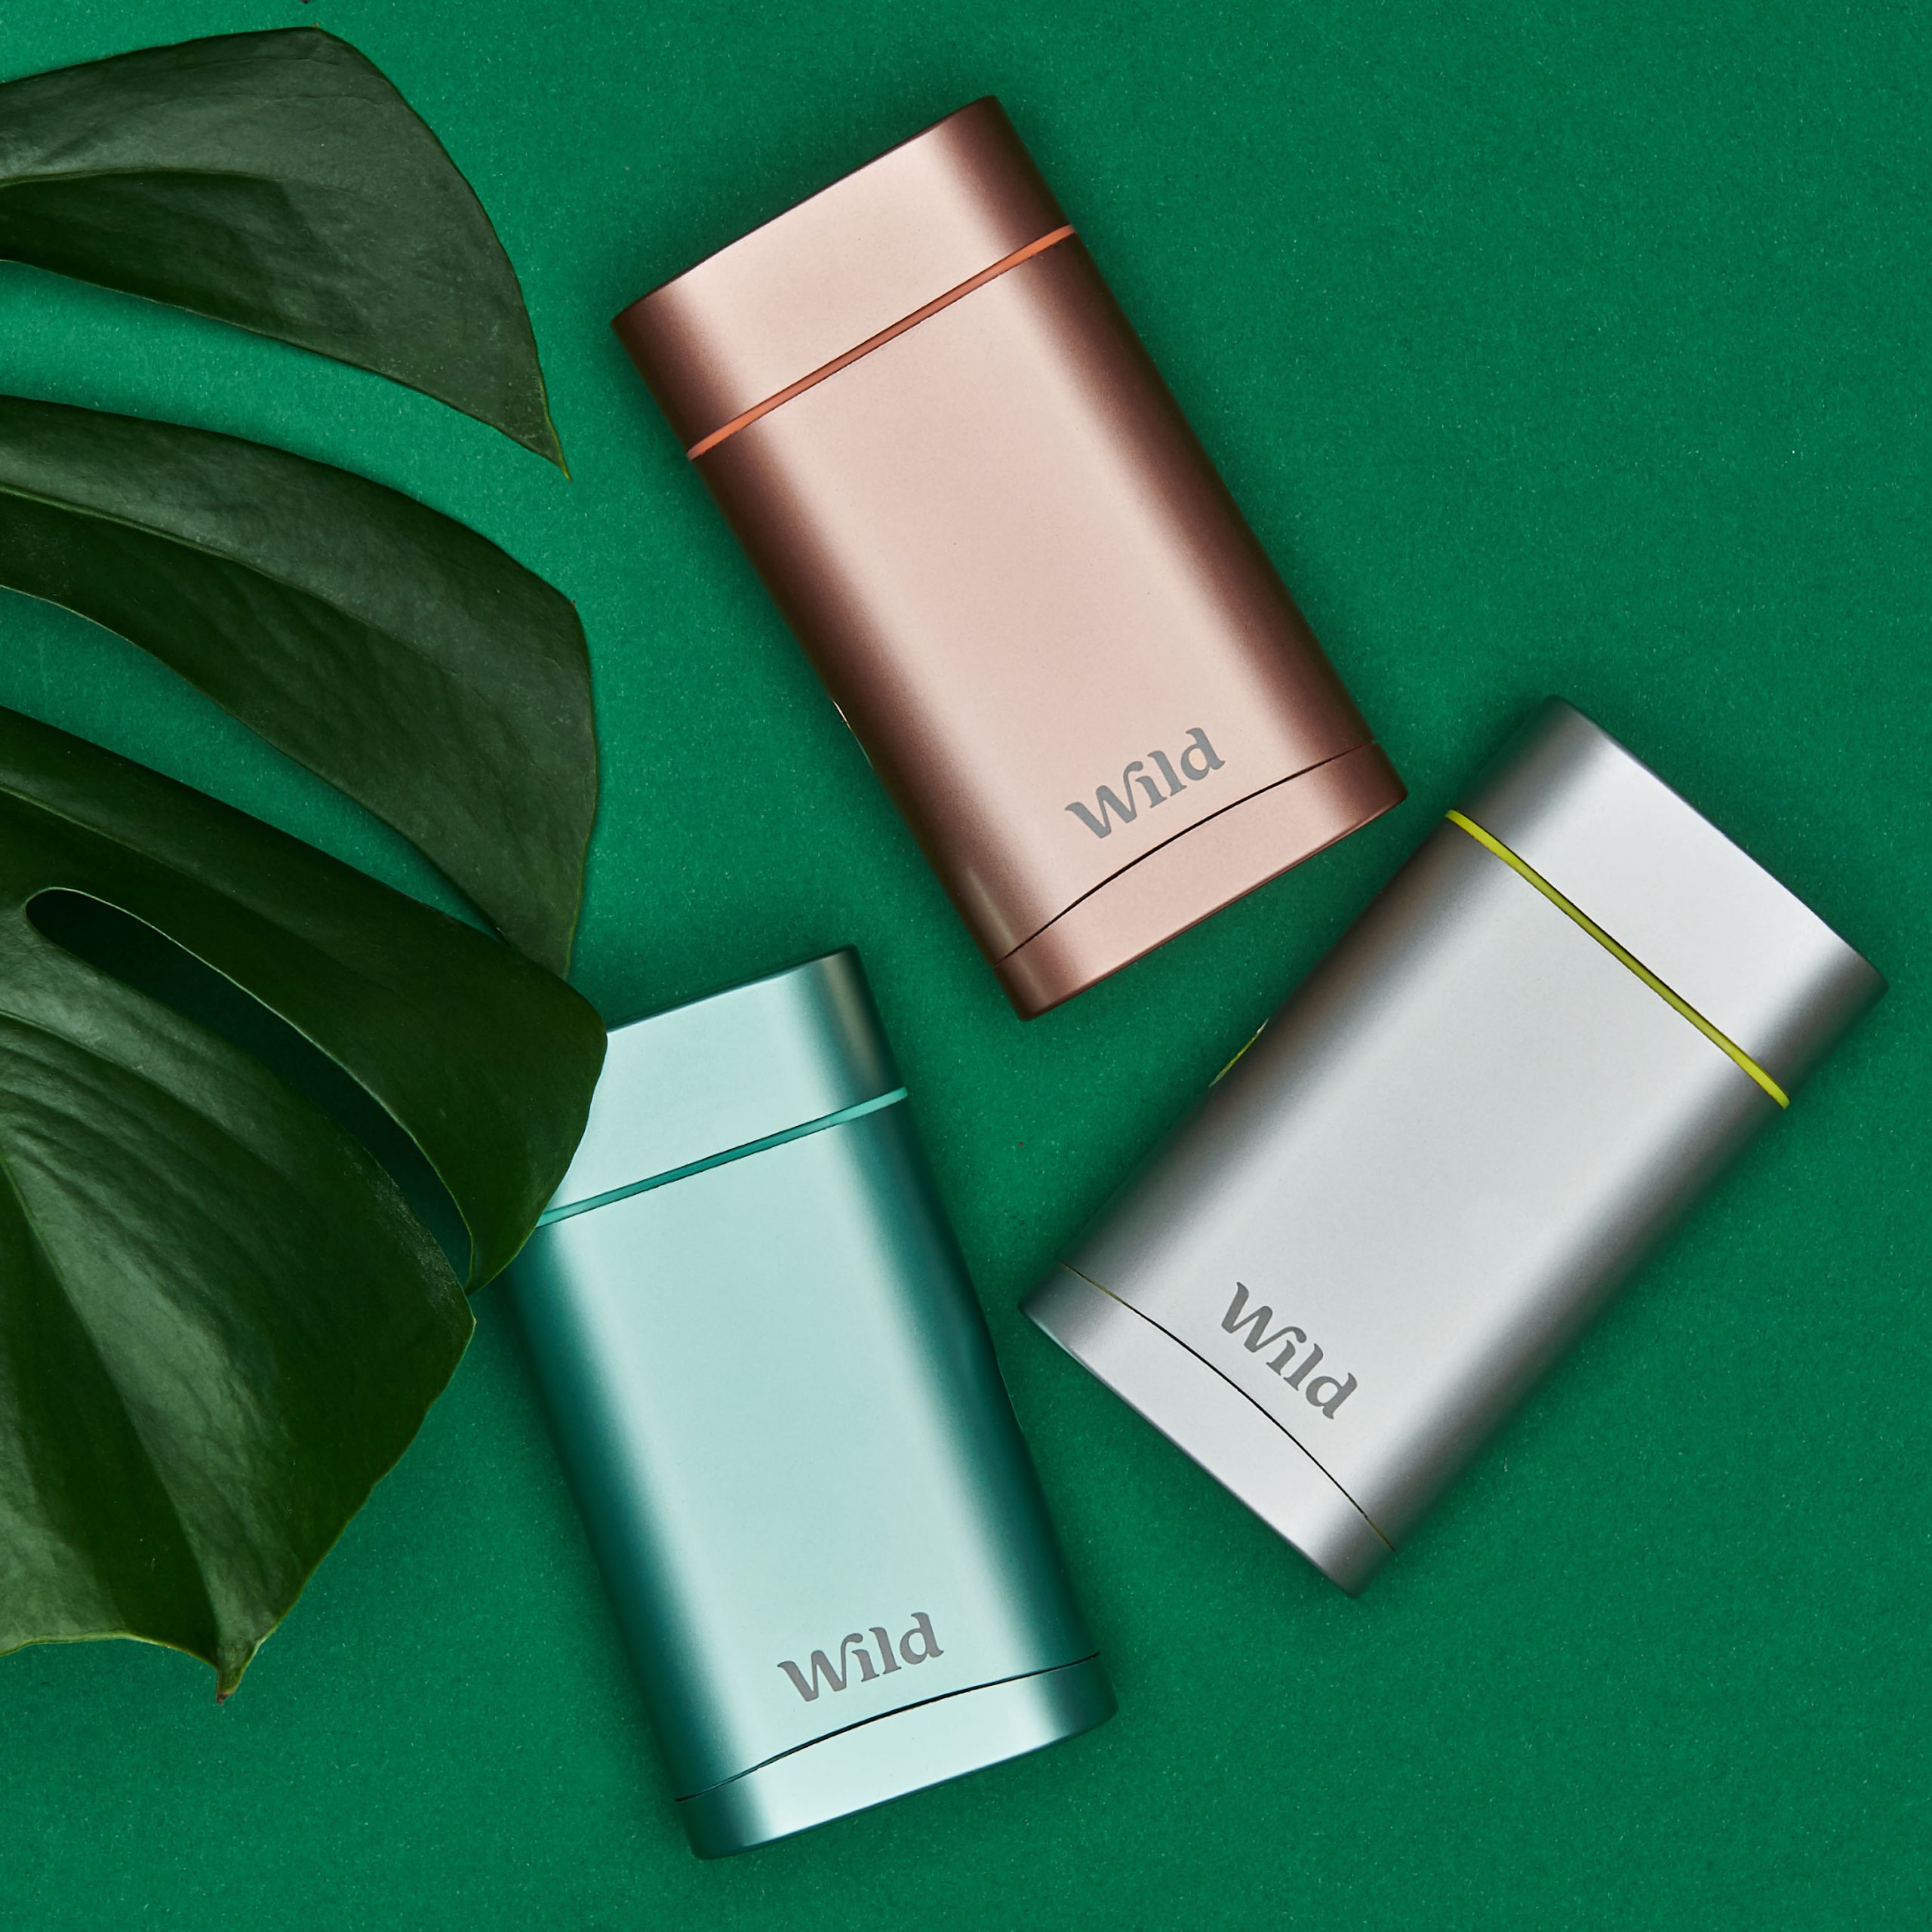 A Fully Sustainable Refillable Deodorant: Wild Promotes Eco-friendly Personal Care Through Innovative Design